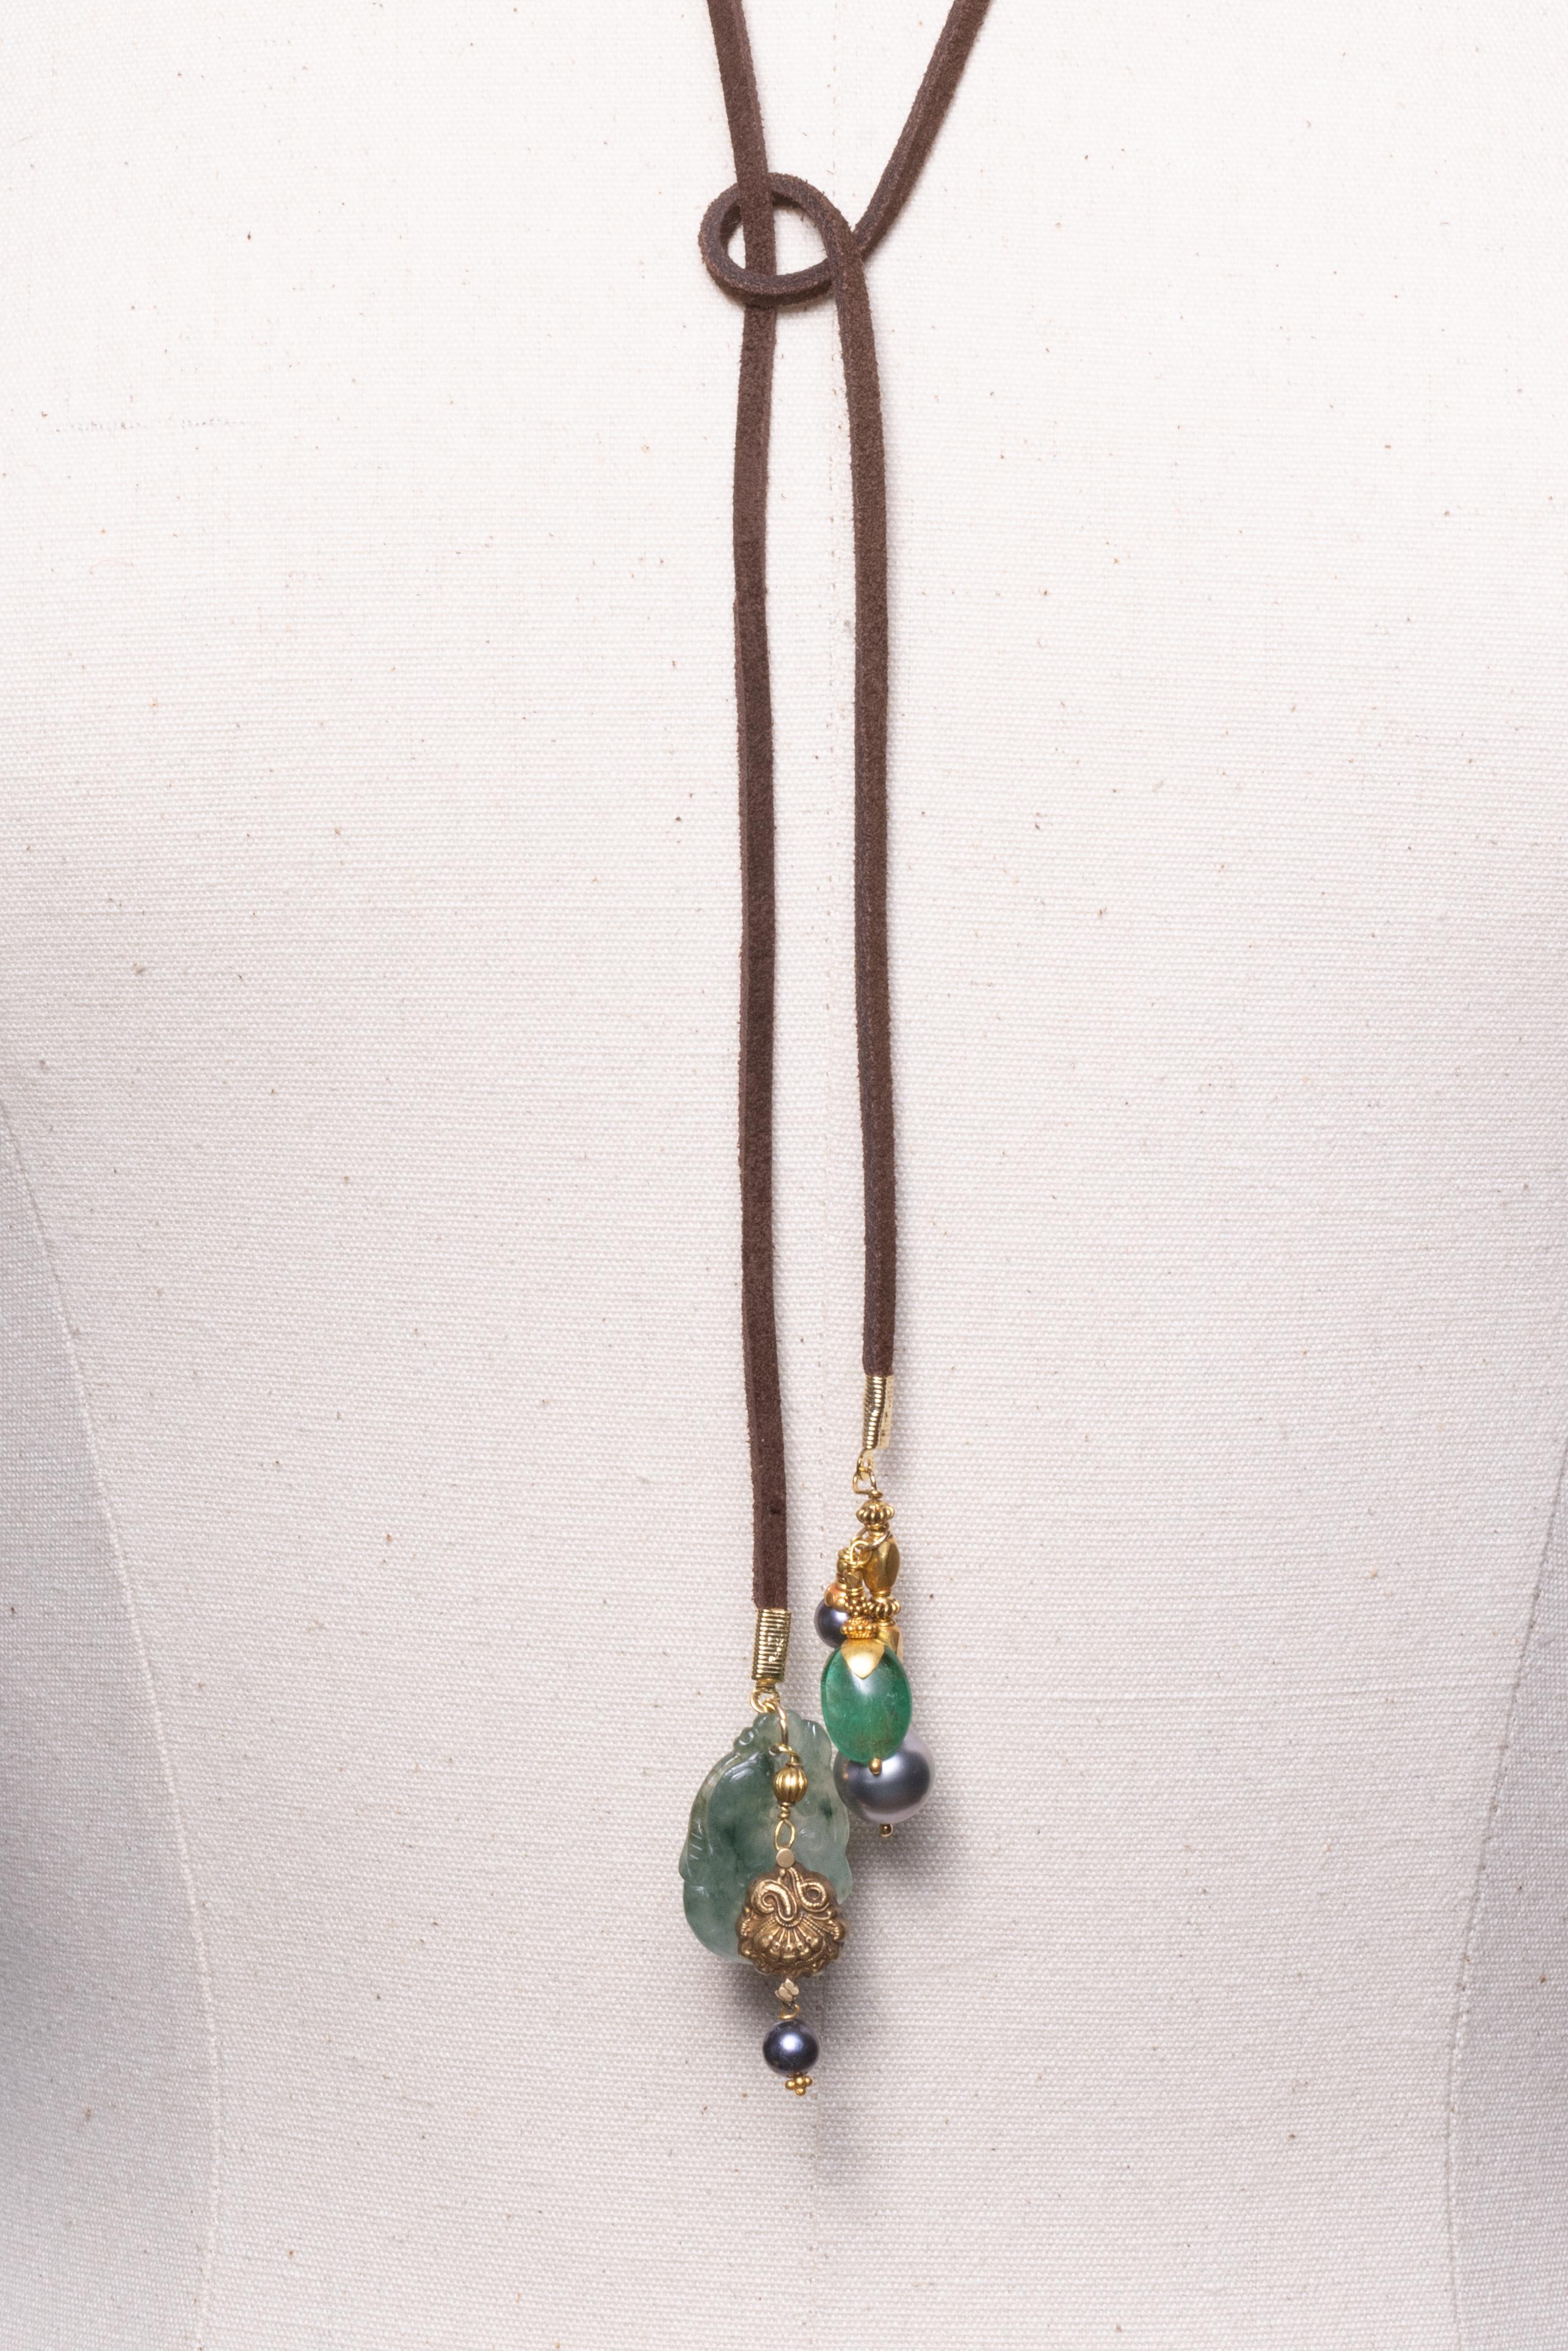 Leather Lariat with Black Tahitian Pearls, Jade, Emeralds and 18K Gold For Sale 1